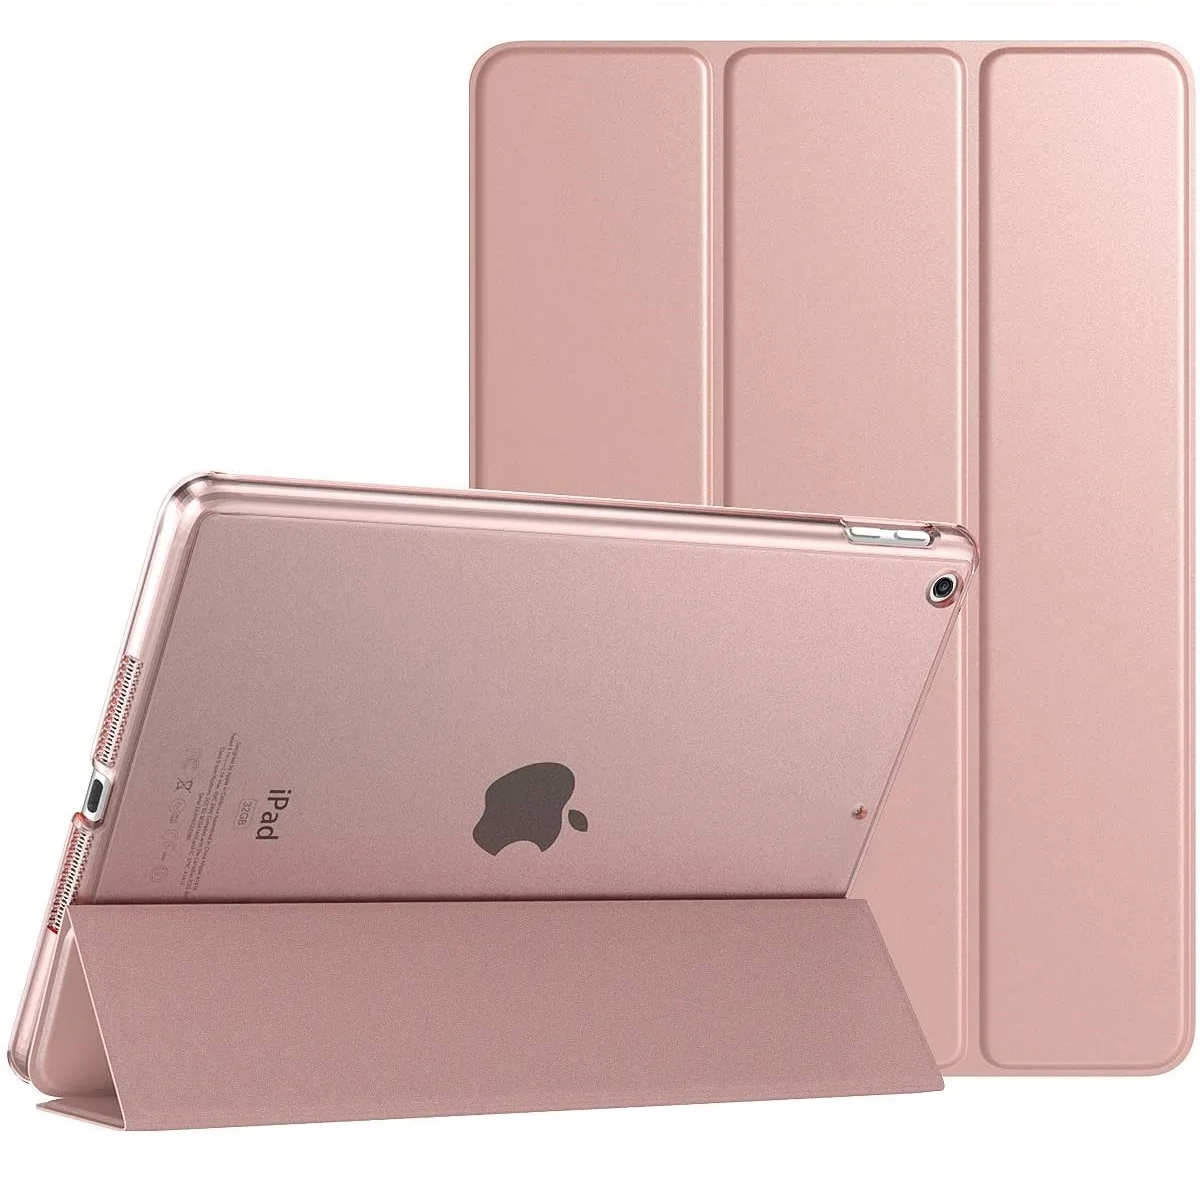 For iPad 9.7 2017 2018 5/6th Gen Tablet Stand for iPad air 4 air 5 9th 10.2 iPad 2 3 4 9.7 Cover Ultra Slim Case Shell with Pen